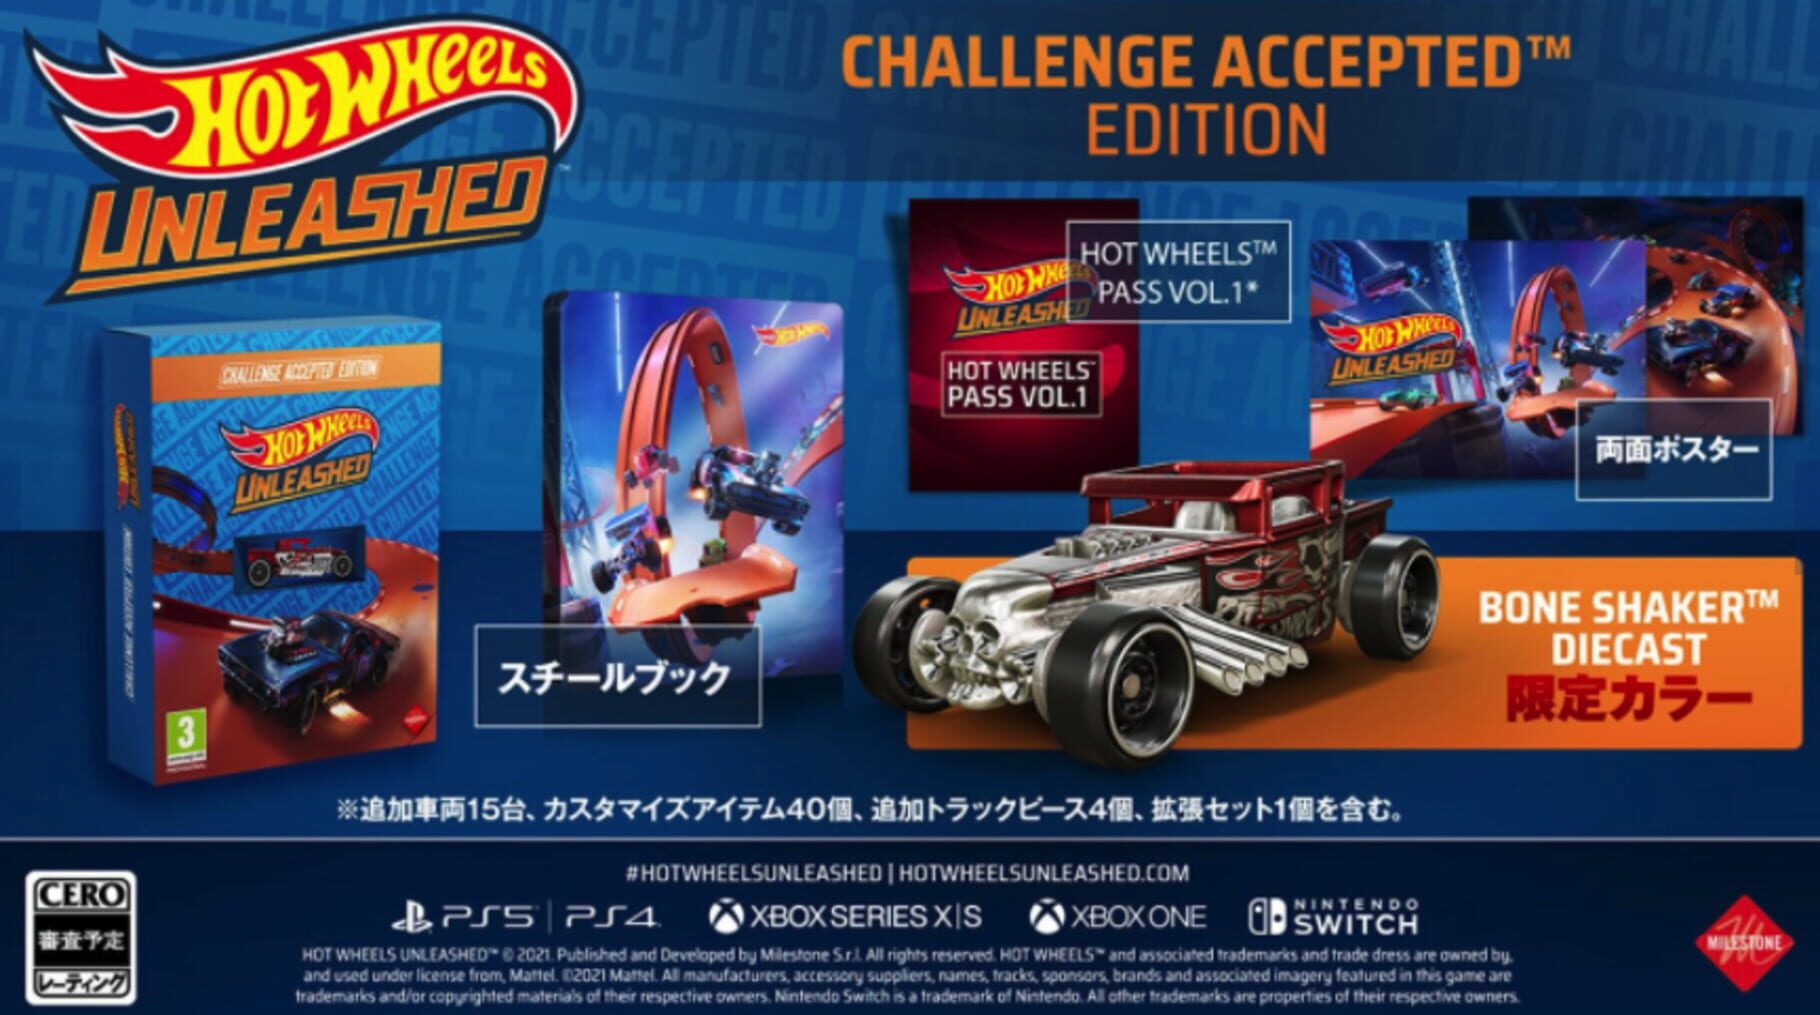 Hot Wheels Unleashed: Challenge Accepted Edition artwork